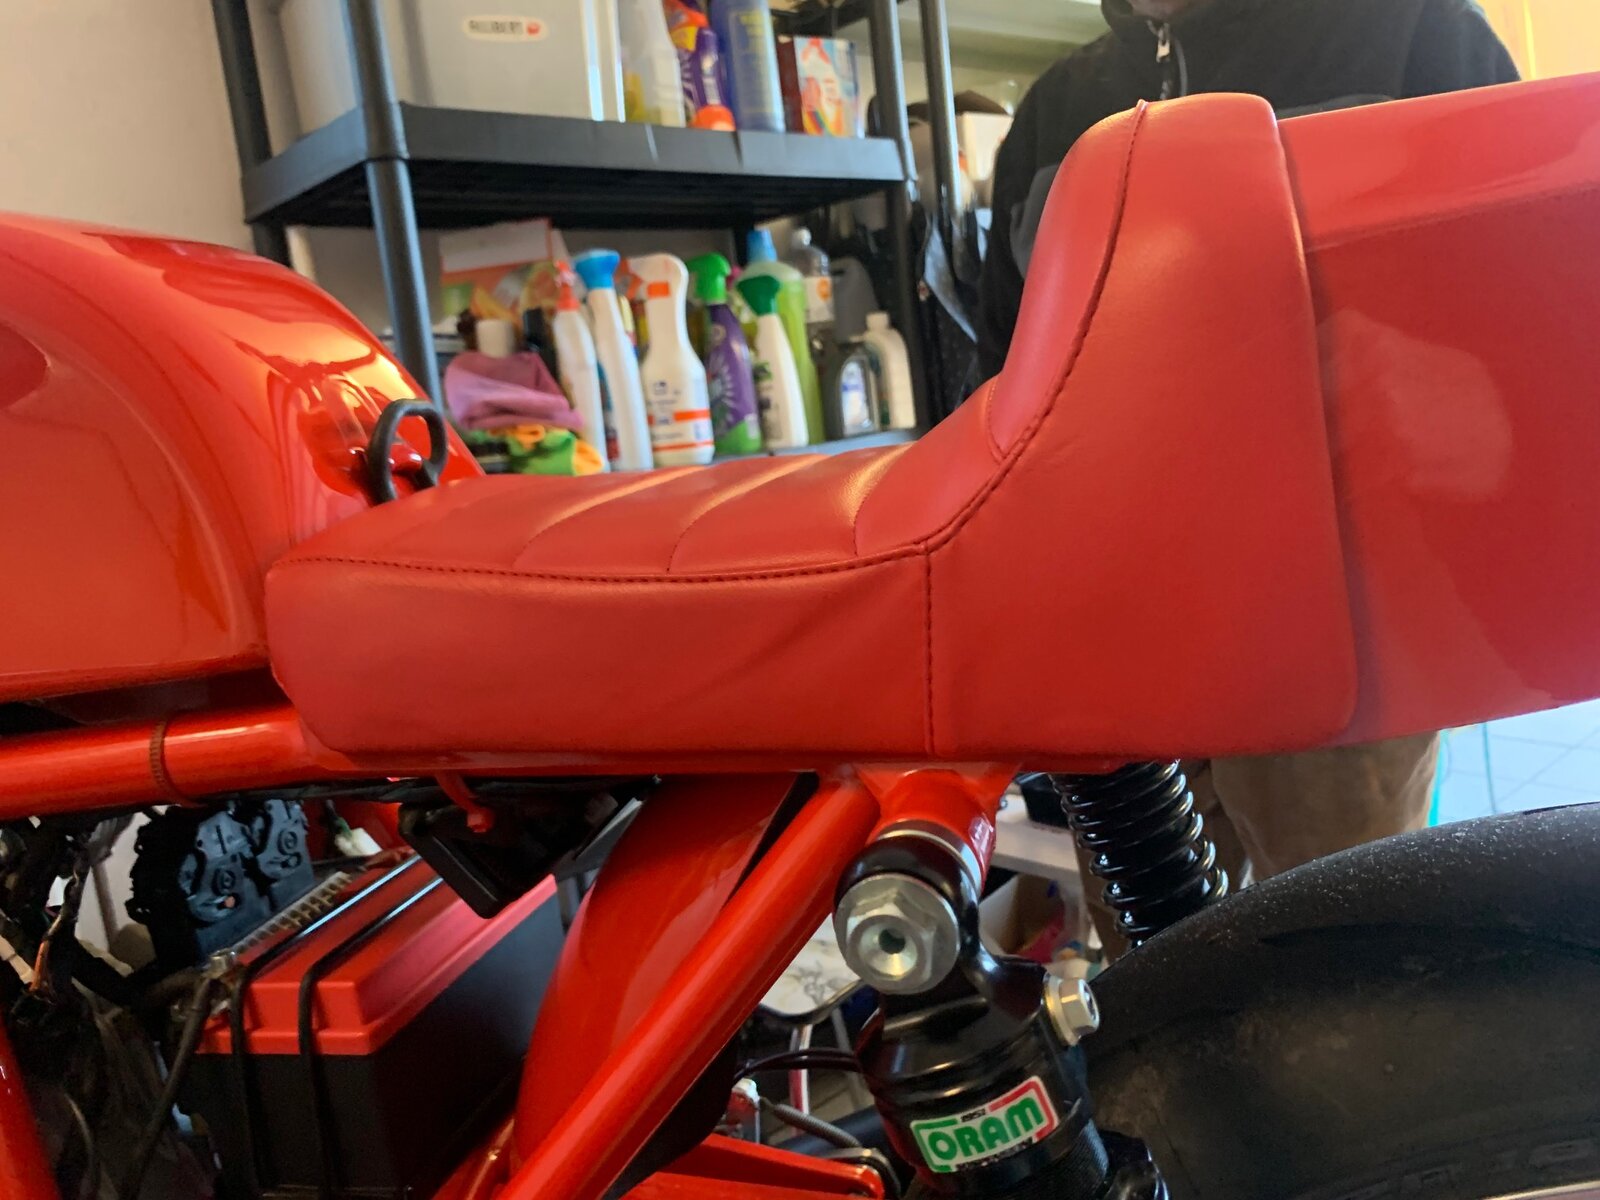 How to adapt a MV Magni for a 71 old disabled rider